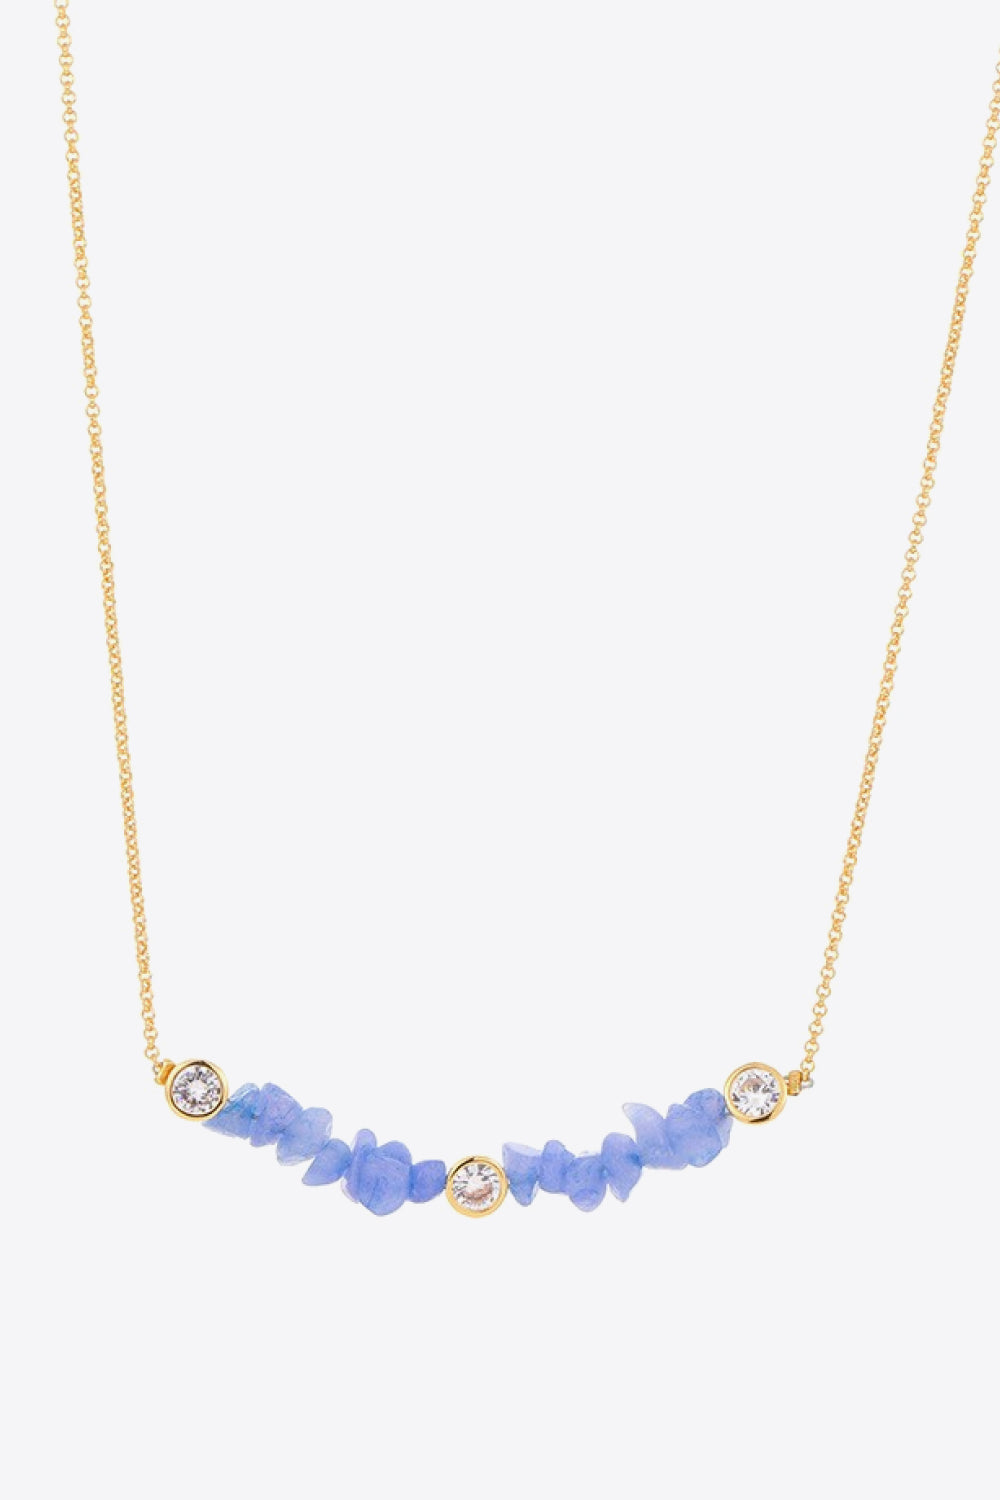 Stay Chic Stone Necklace | AdoreStarr